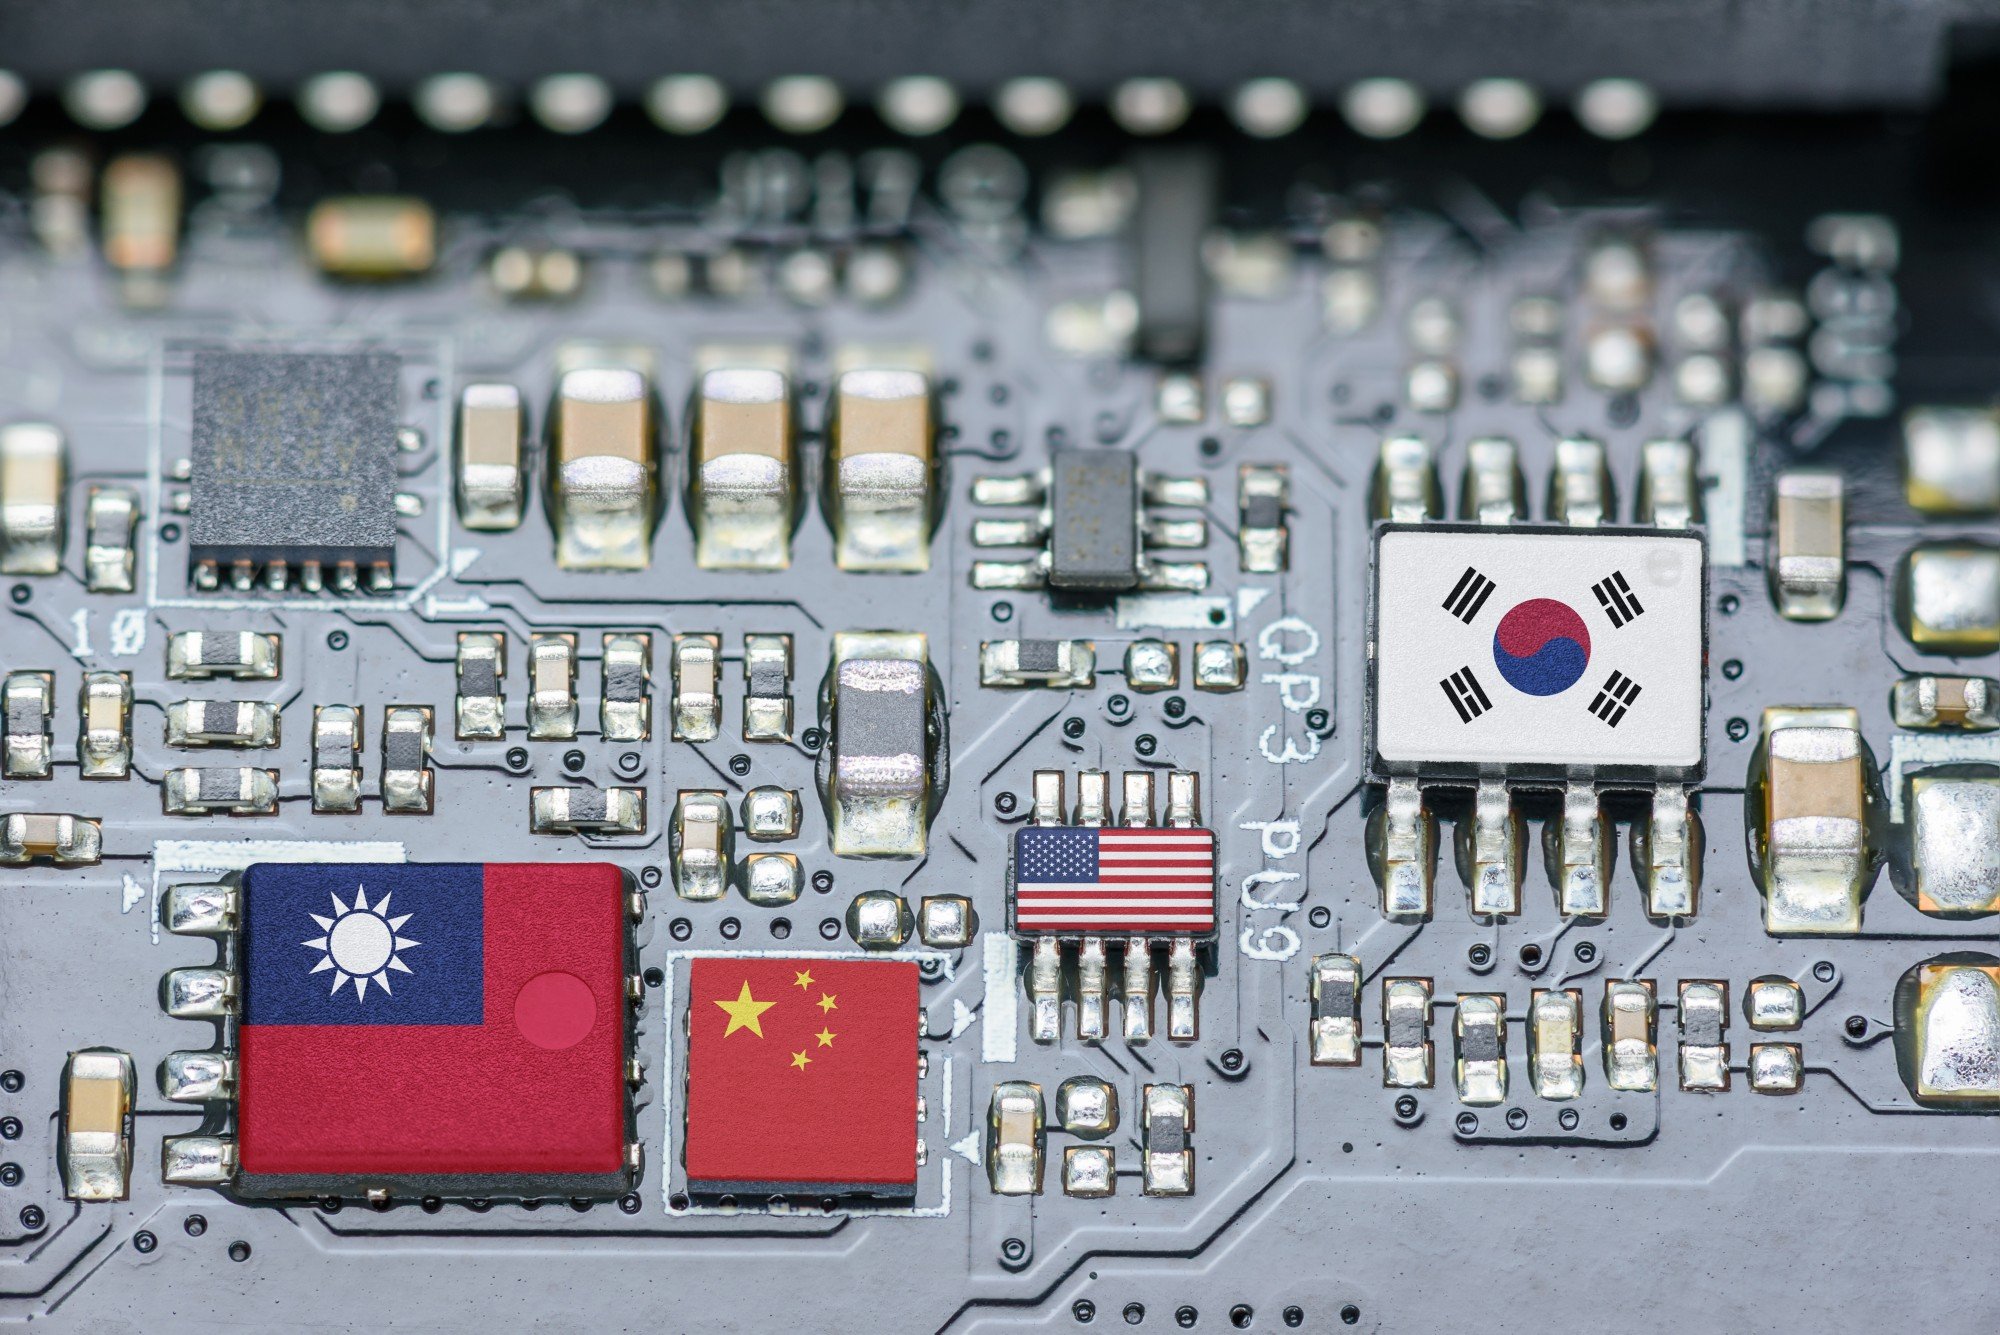 Tech war: South Korean trade group calls for chip diversification from China as Seoul mulls joining US-led semiconductor alliance